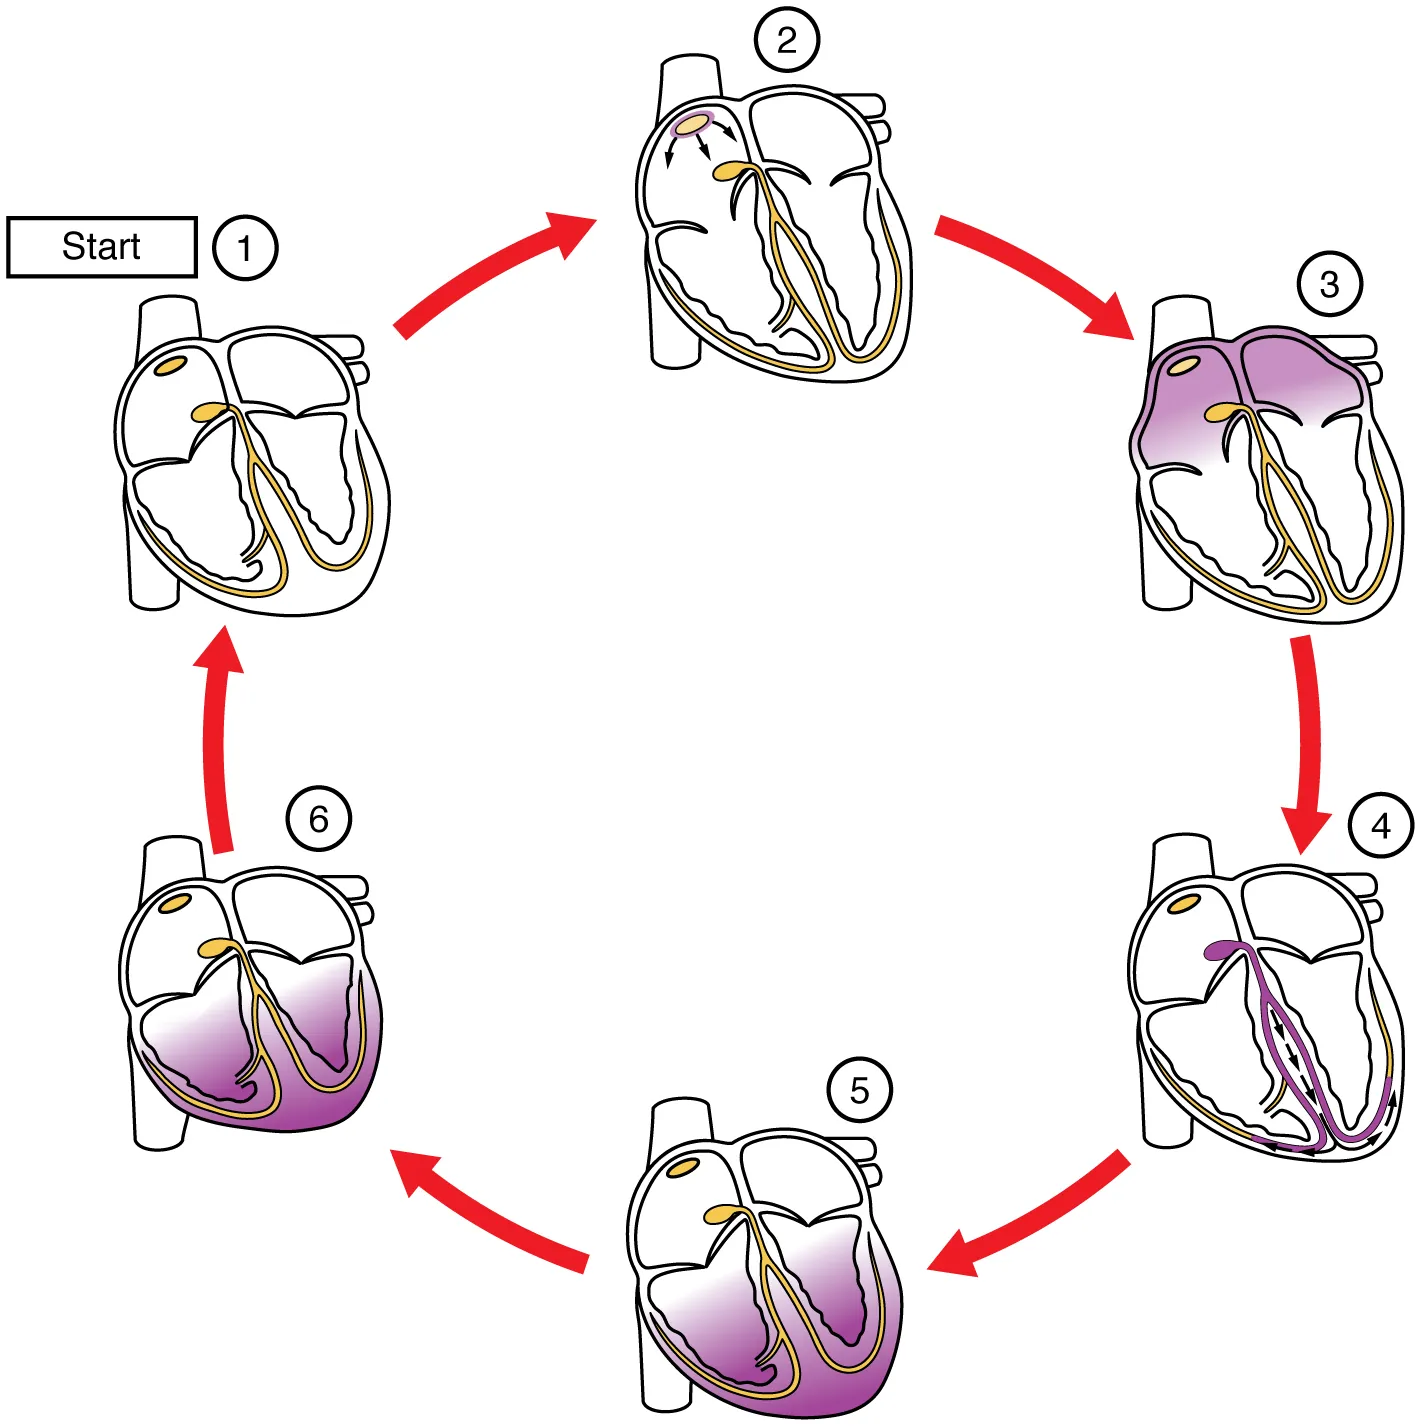 This image shows the different stages in the conduction cycle of the heart.